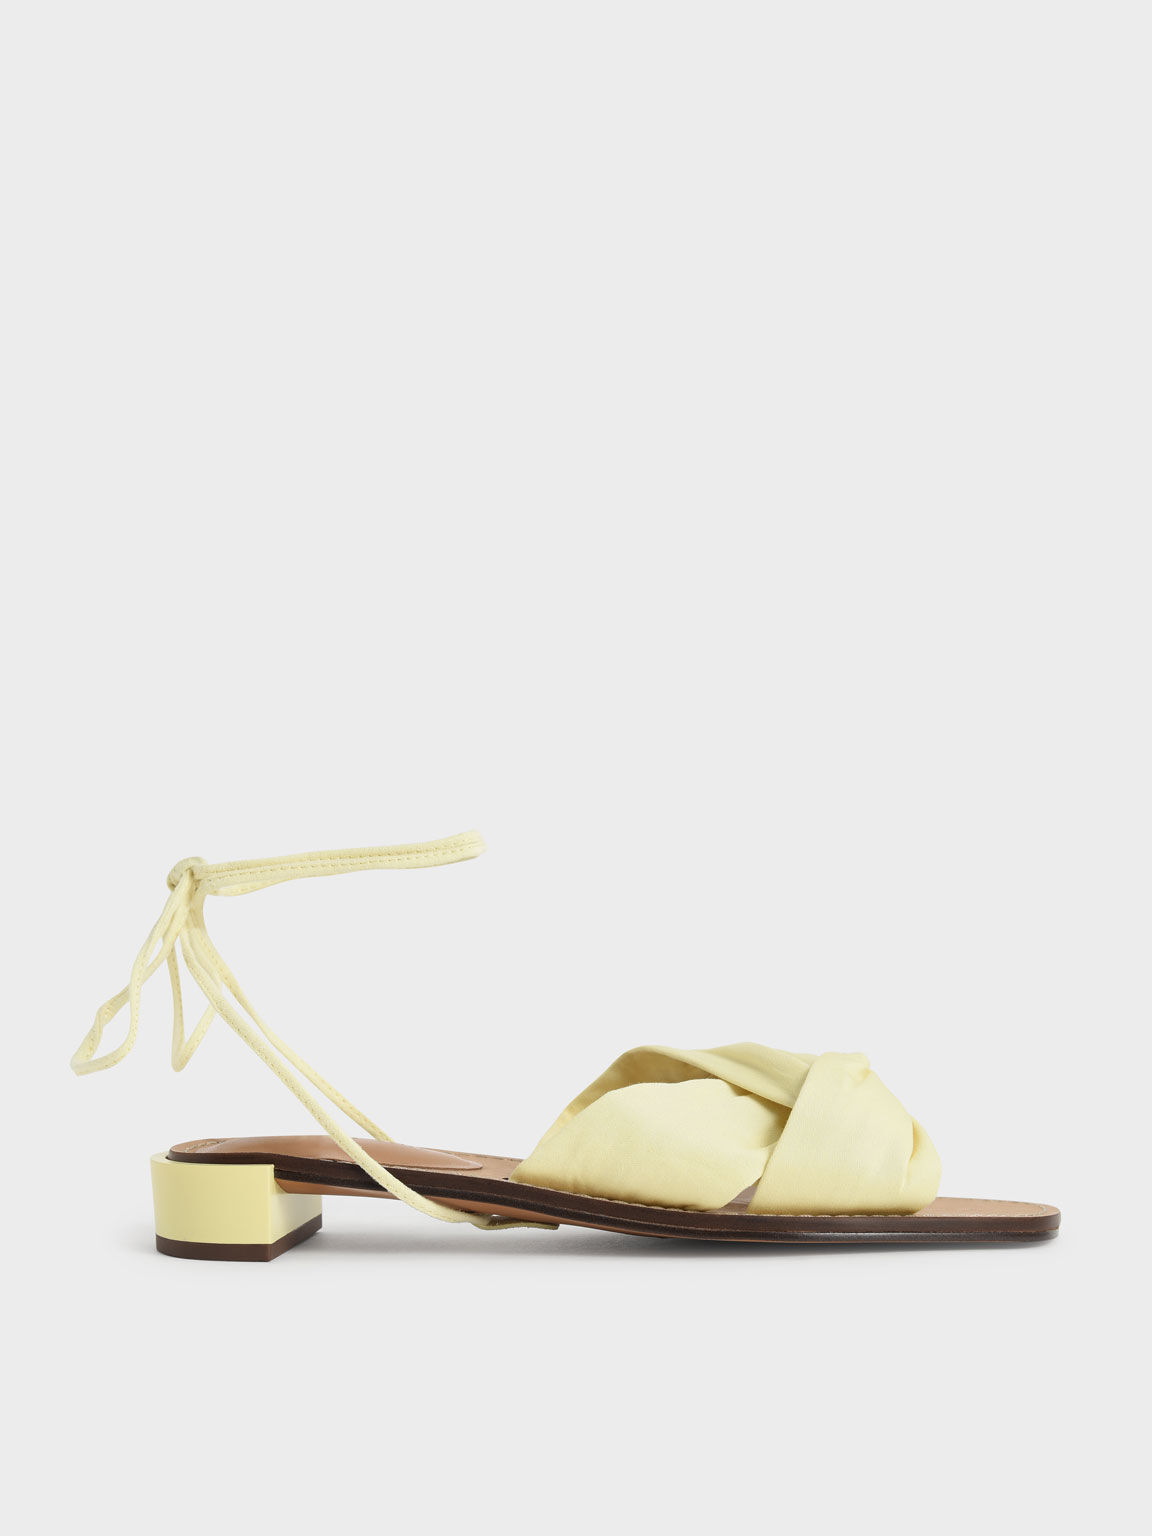 Knotted Tie-Around Sandals, Yellow, hi-res